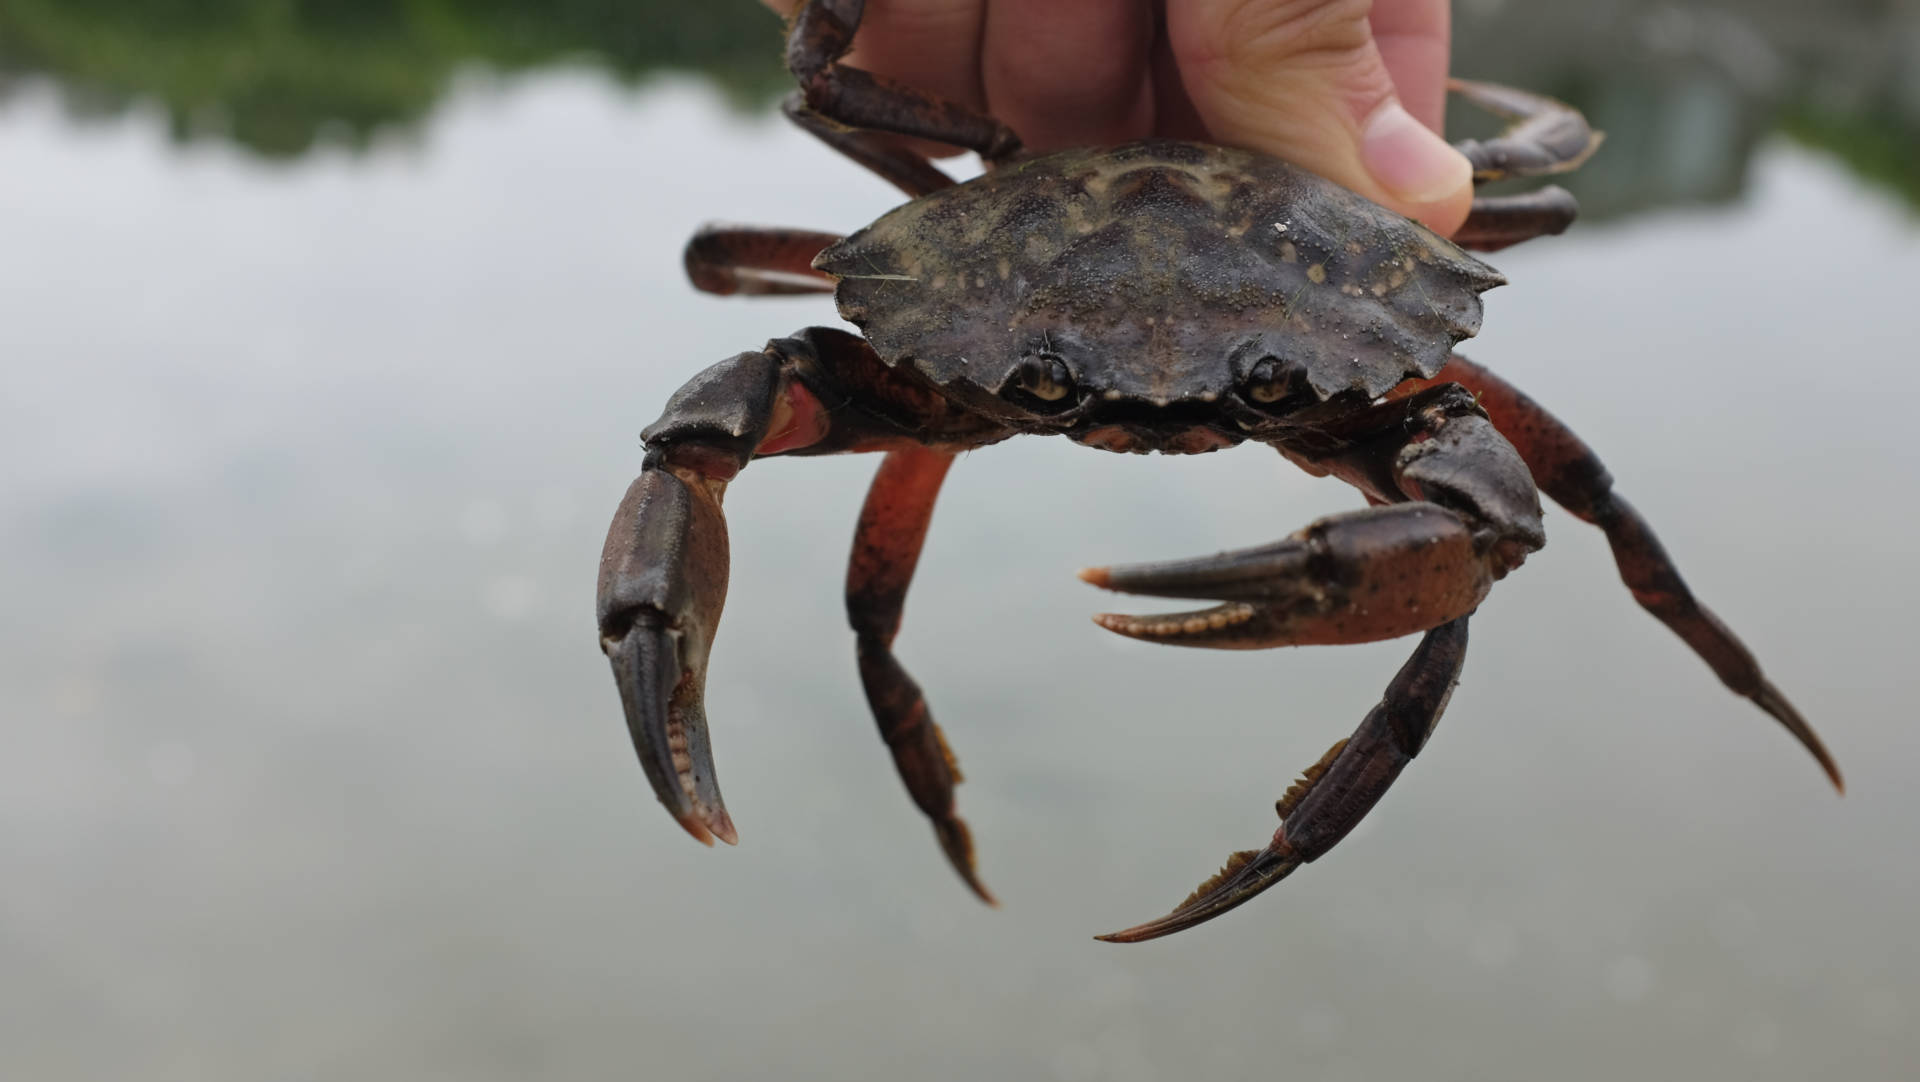 rs27838_green-crab-1-uncropped-1920x1082.jpg